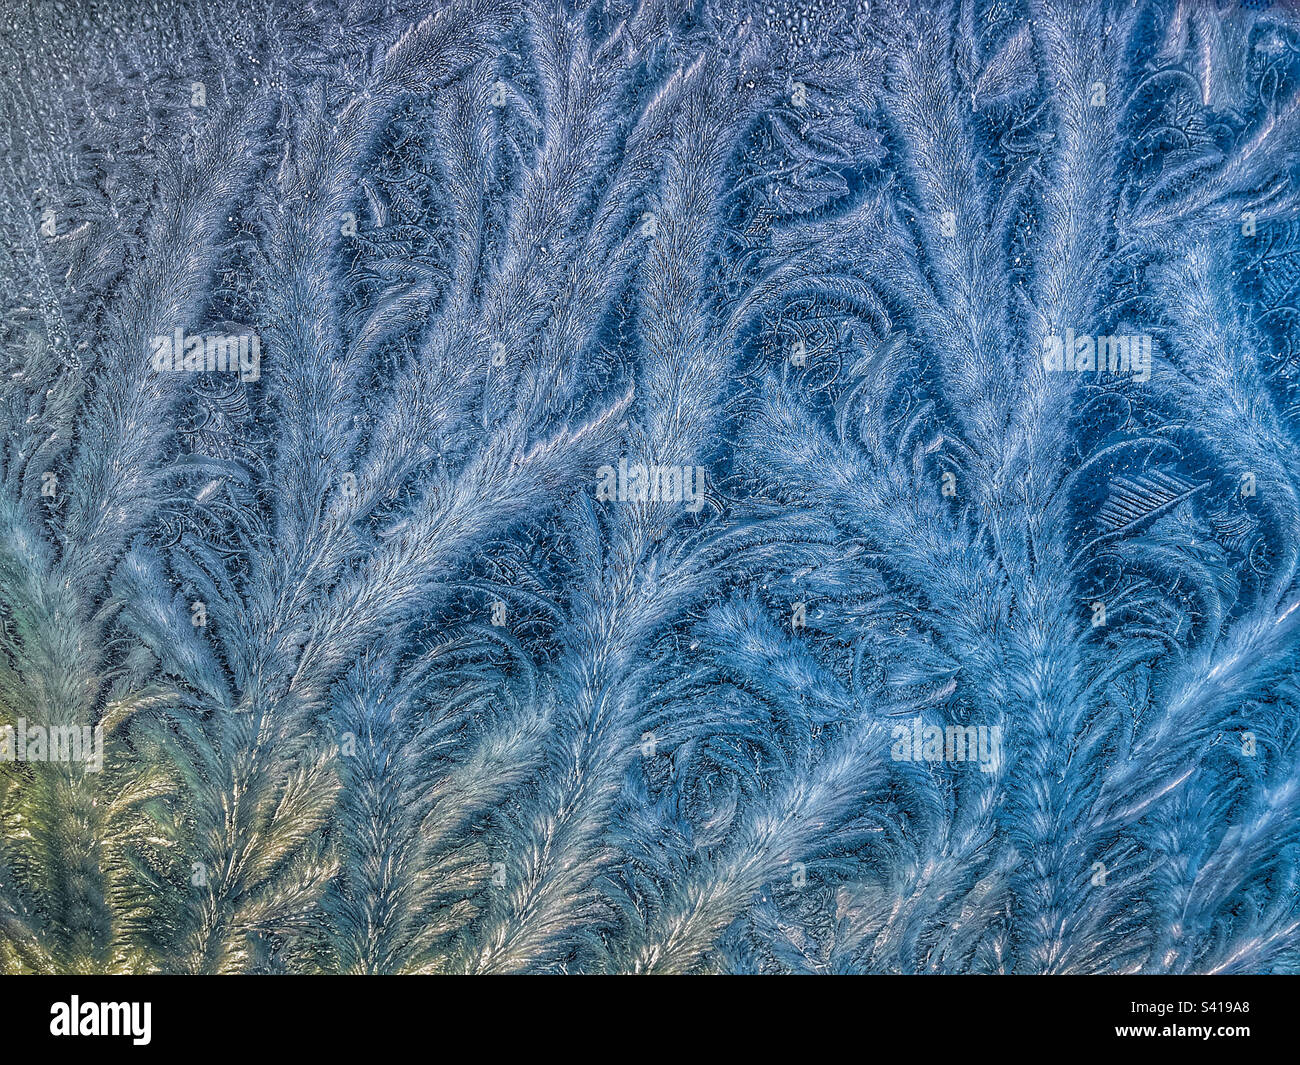 Abstract background, beautiful, natural texture pattern of ice and frost on windscreen glass Stock Photo